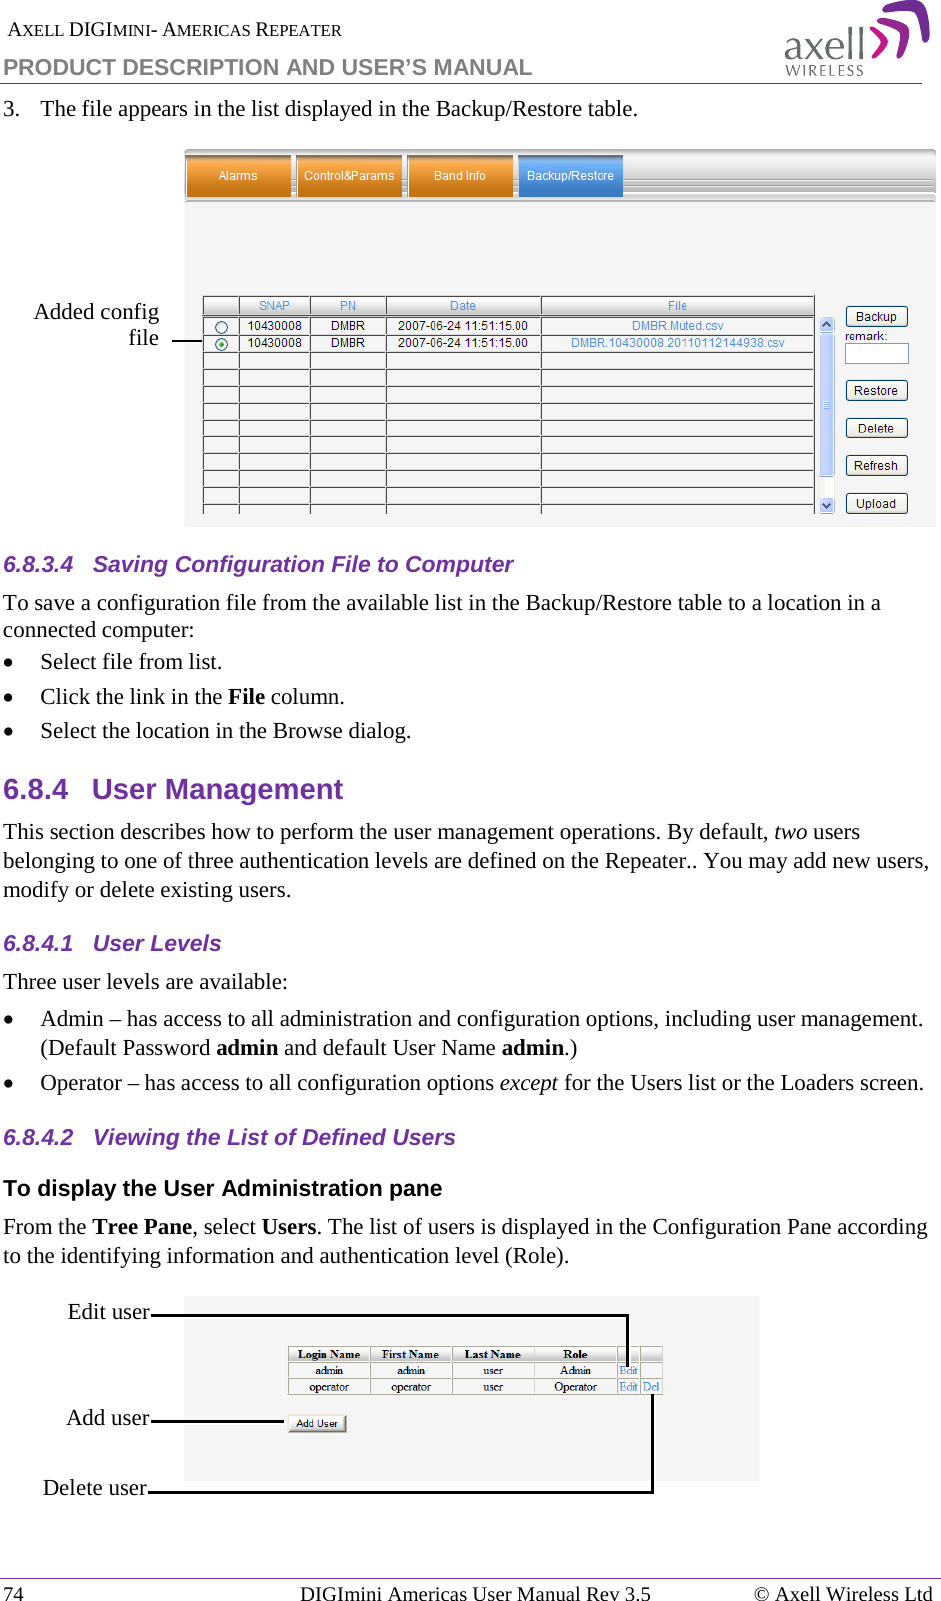  AXELL DIGIMINI- AMERICAS REPEATER PRODUCT DESCRIPTION AND USER’S MANUAL 74   DIGImini Americas User Manual Rev 3.5  © Axell Wireless Ltd 3.  The file appears in the list displayed in the Backup/Restore table.  6.8.3.4  Saving Configuration File to Computer To save a configuration file from the available list in the Backup/Restore table to a location in a connected computer: • Select file from list. • Click the link in the File column. • Select the location in the Browse dialog. 6.8.4  User Management This section describes how to perform the user management operations. By default, two users belonging to one of three authentication levels are defined on the Repeater.. You may add new users, modify or delete existing users.  6.8.4.1  User Levels Three user levels are available:  • Admin – has access to all administration and configuration options, including user management. (Default Password admin and default User Name admin.) • Operator – has access to all configuration options except for the Users list or the Loaders screen.  6.8.4.2  Viewing the List of Defined Users  To display the User Administration pane From the Tree Pane, select Users. The list of users is displayed in the Configuration Pane according to the identifying information and authentication level (Role).   Edit user  Delete user  Add user Added config  file  